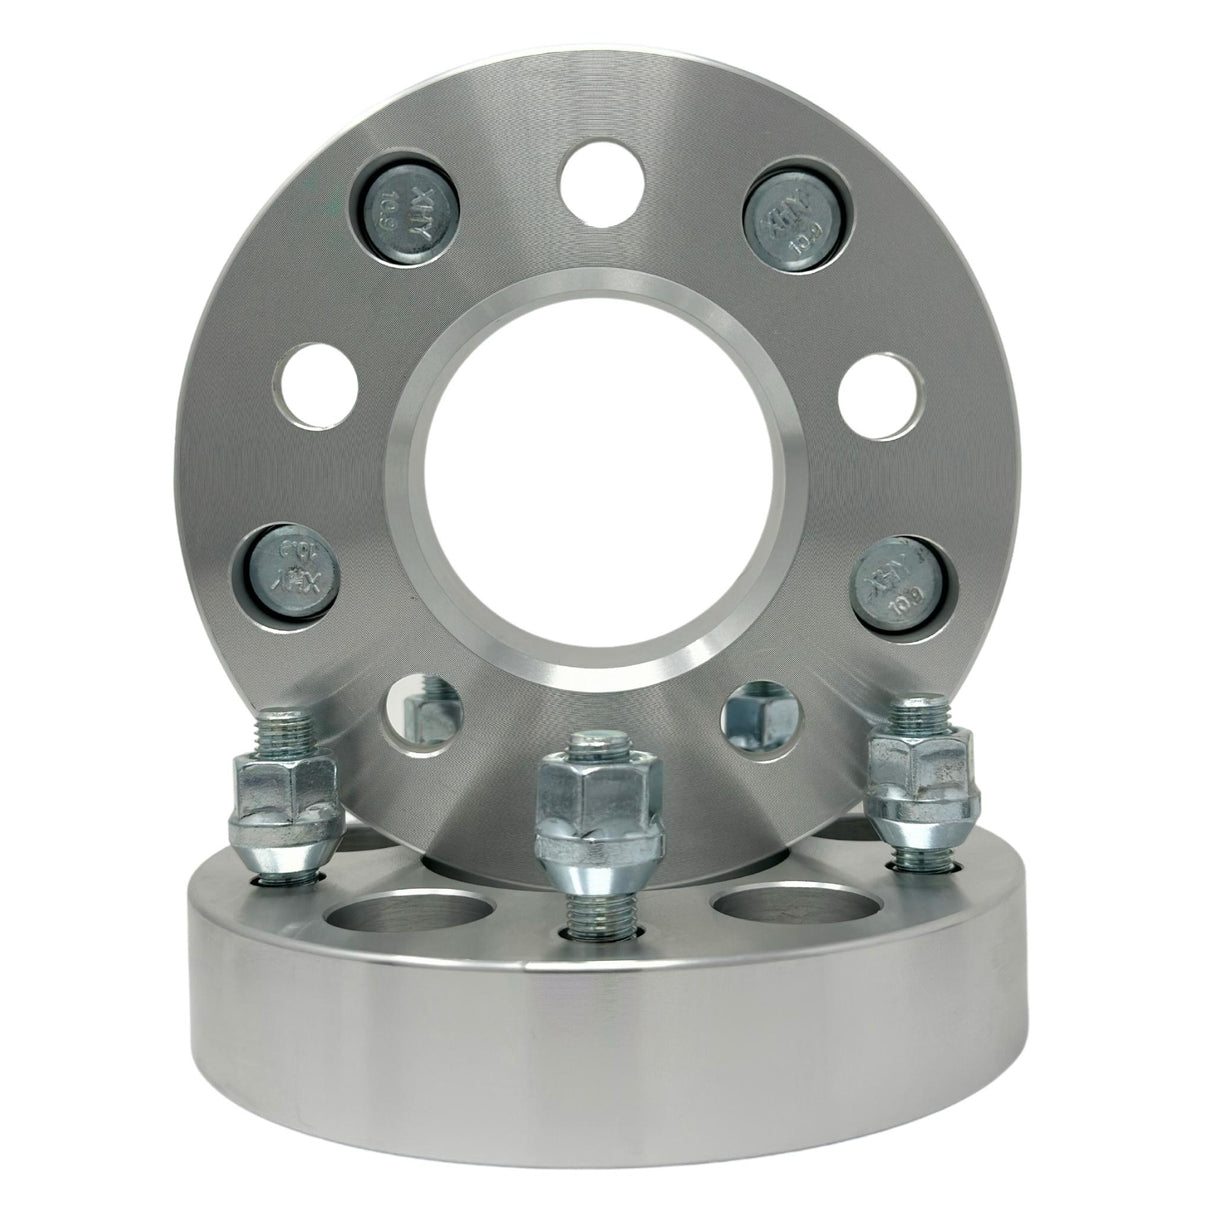 5x100 to 5x108 (Aka 5x4.25) Wheel Adapters 1.25" Inch (32mm) 12x1.5 Studs & Lug Nuts 57.1mm Center Bore To Clear All 5x100 Hubs